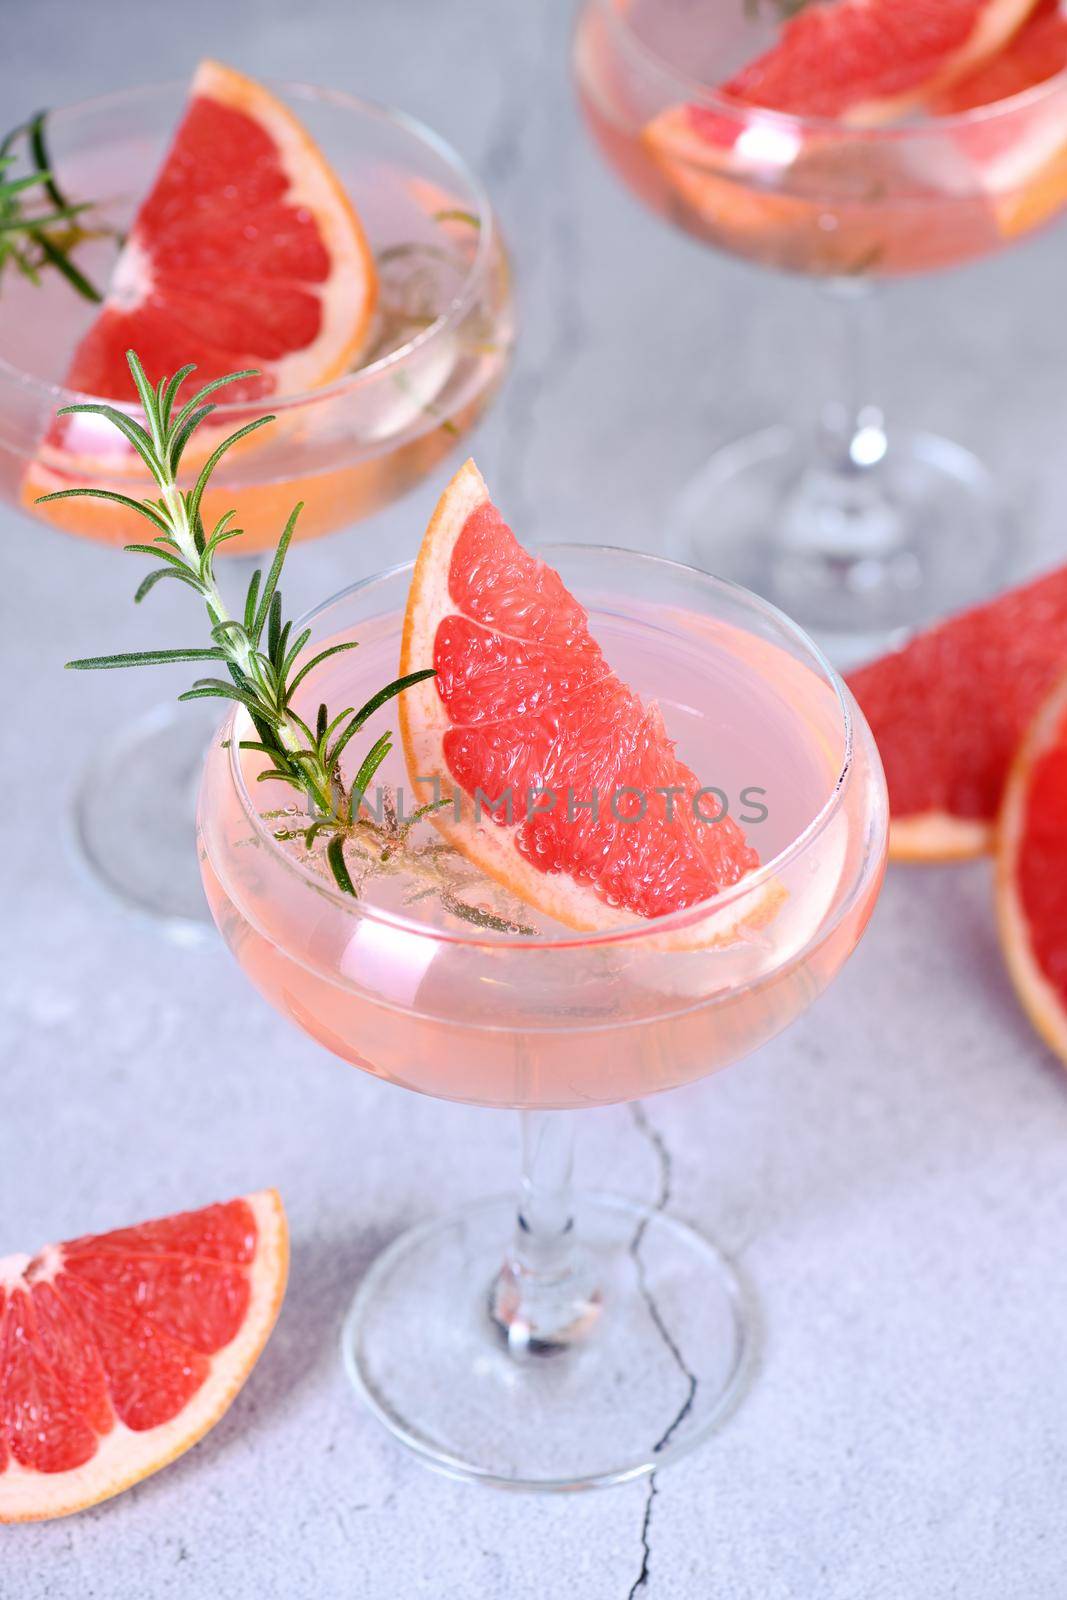 Сocktail Mimosa.  Grapefruit, rosemary and sparkling wine by Apolonia